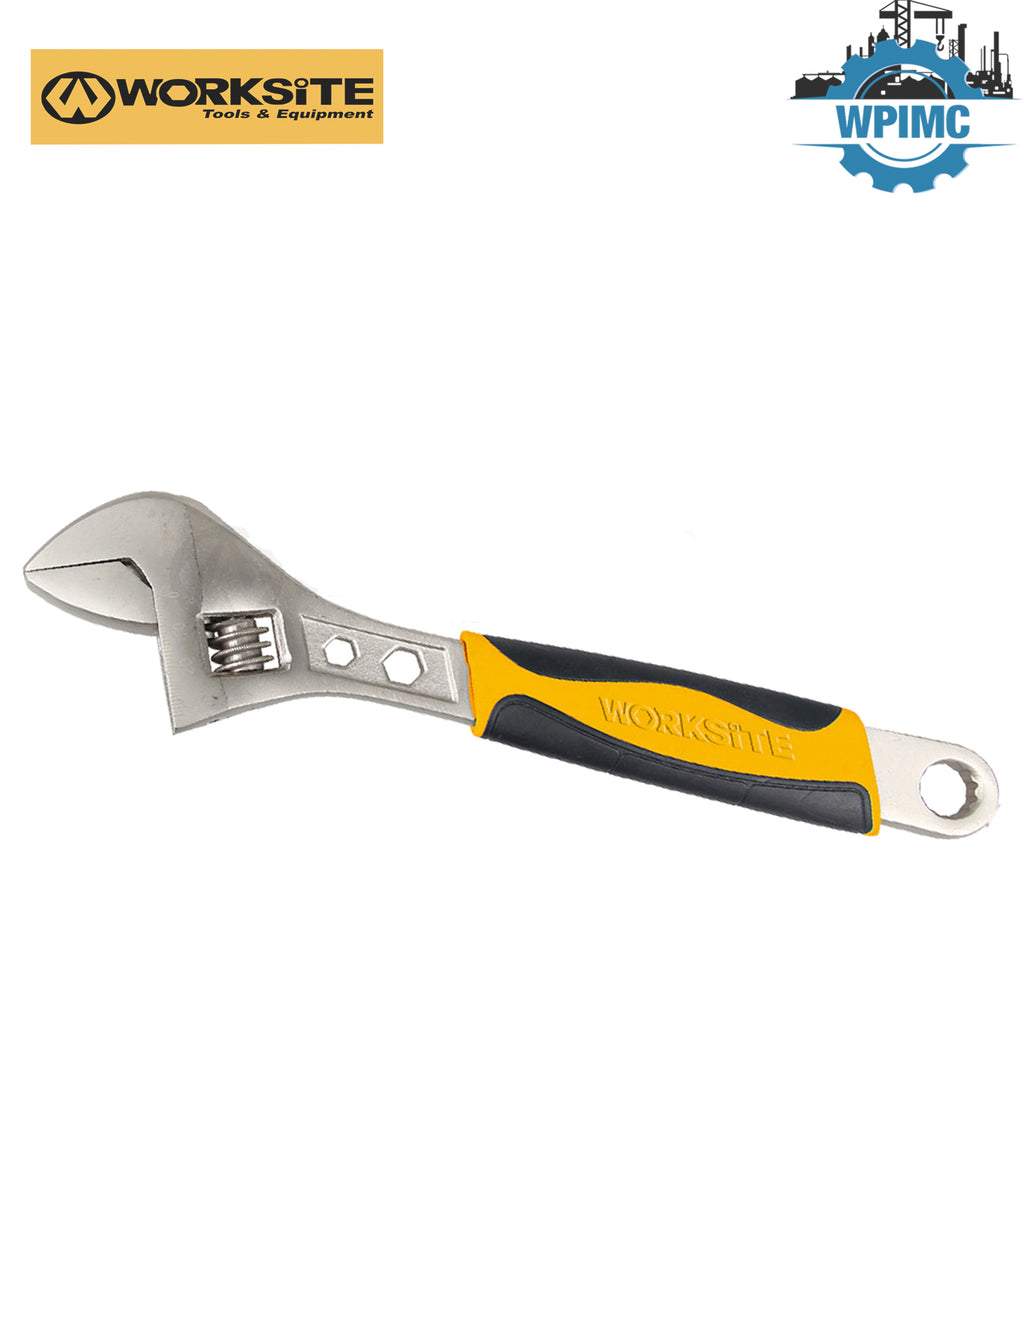 WORKSITE ADJUSTABLE WRENCH WT2512